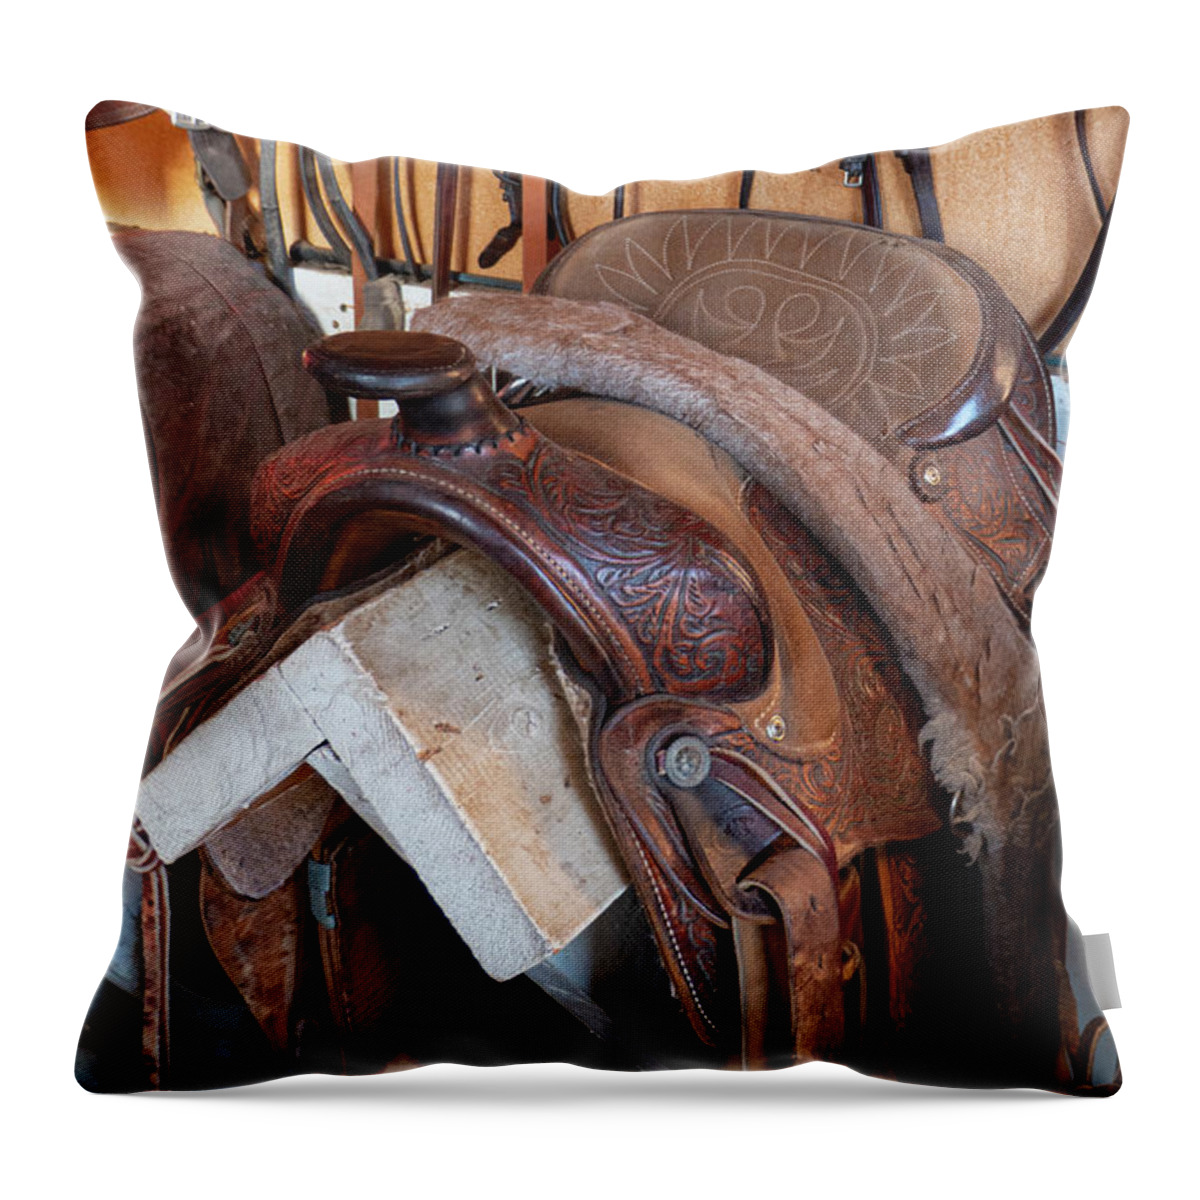 Western Throw Pillow featuring the photograph Western Saddle by Karen Rispin